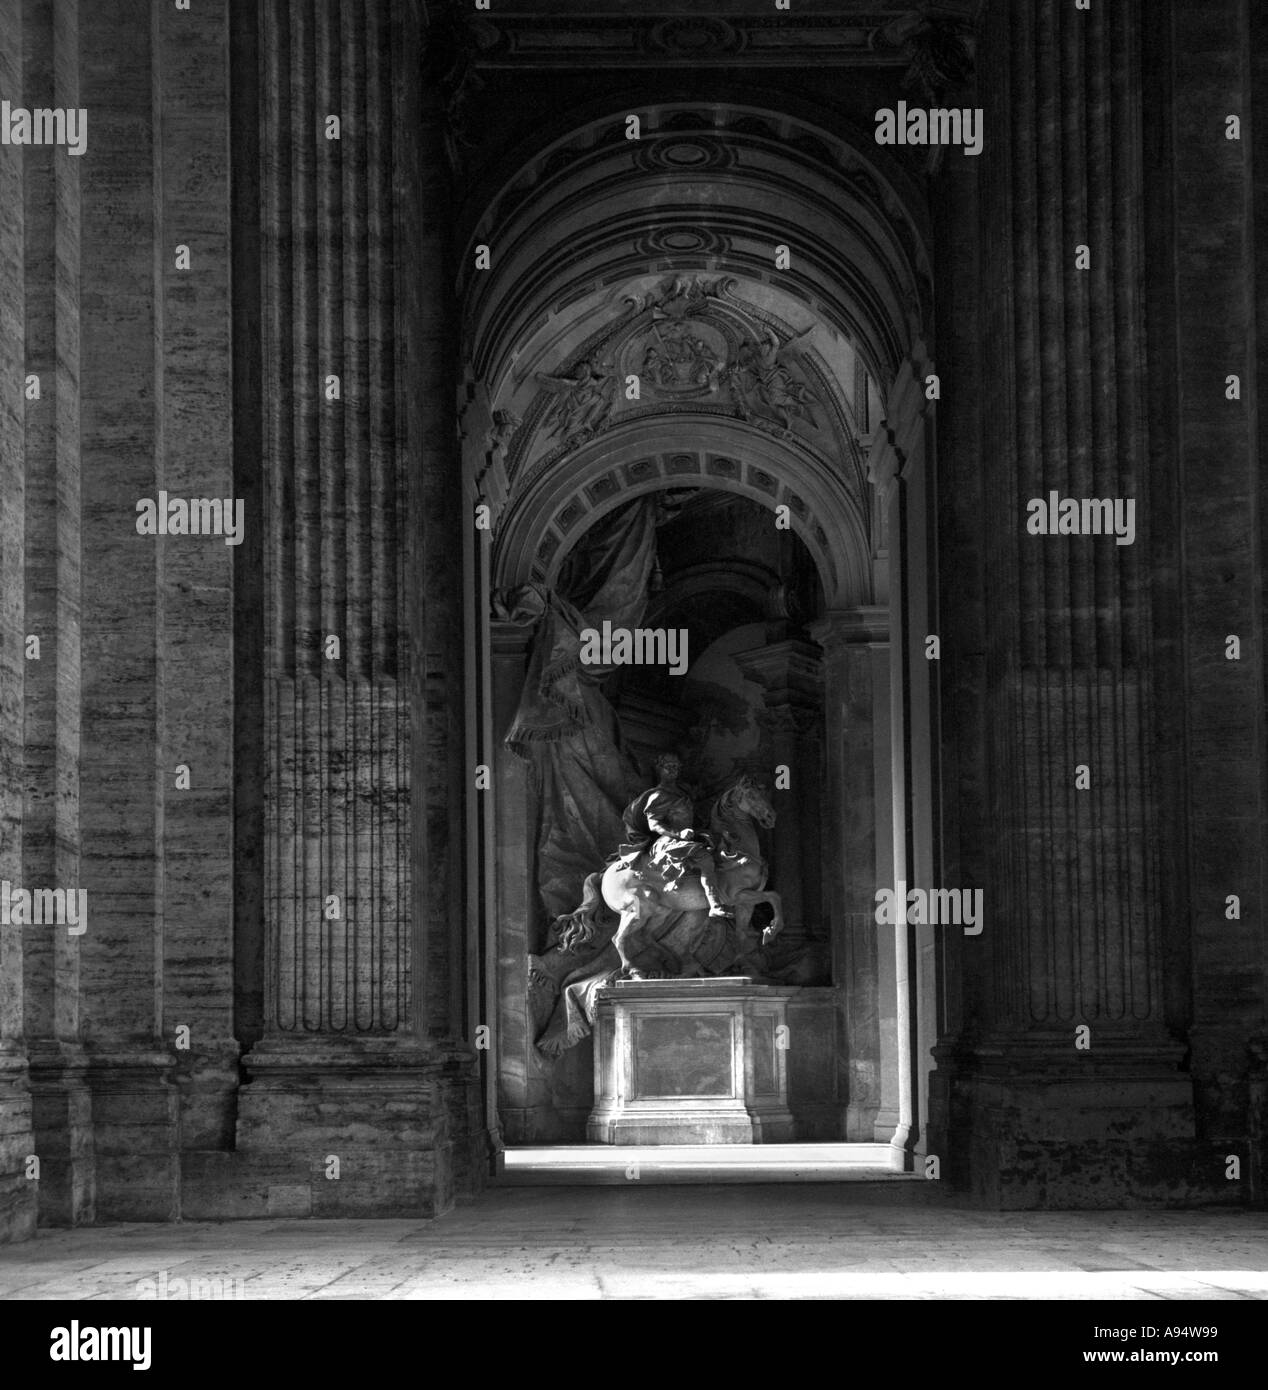 Statue of horse and rider in building in Rome Stock Photo